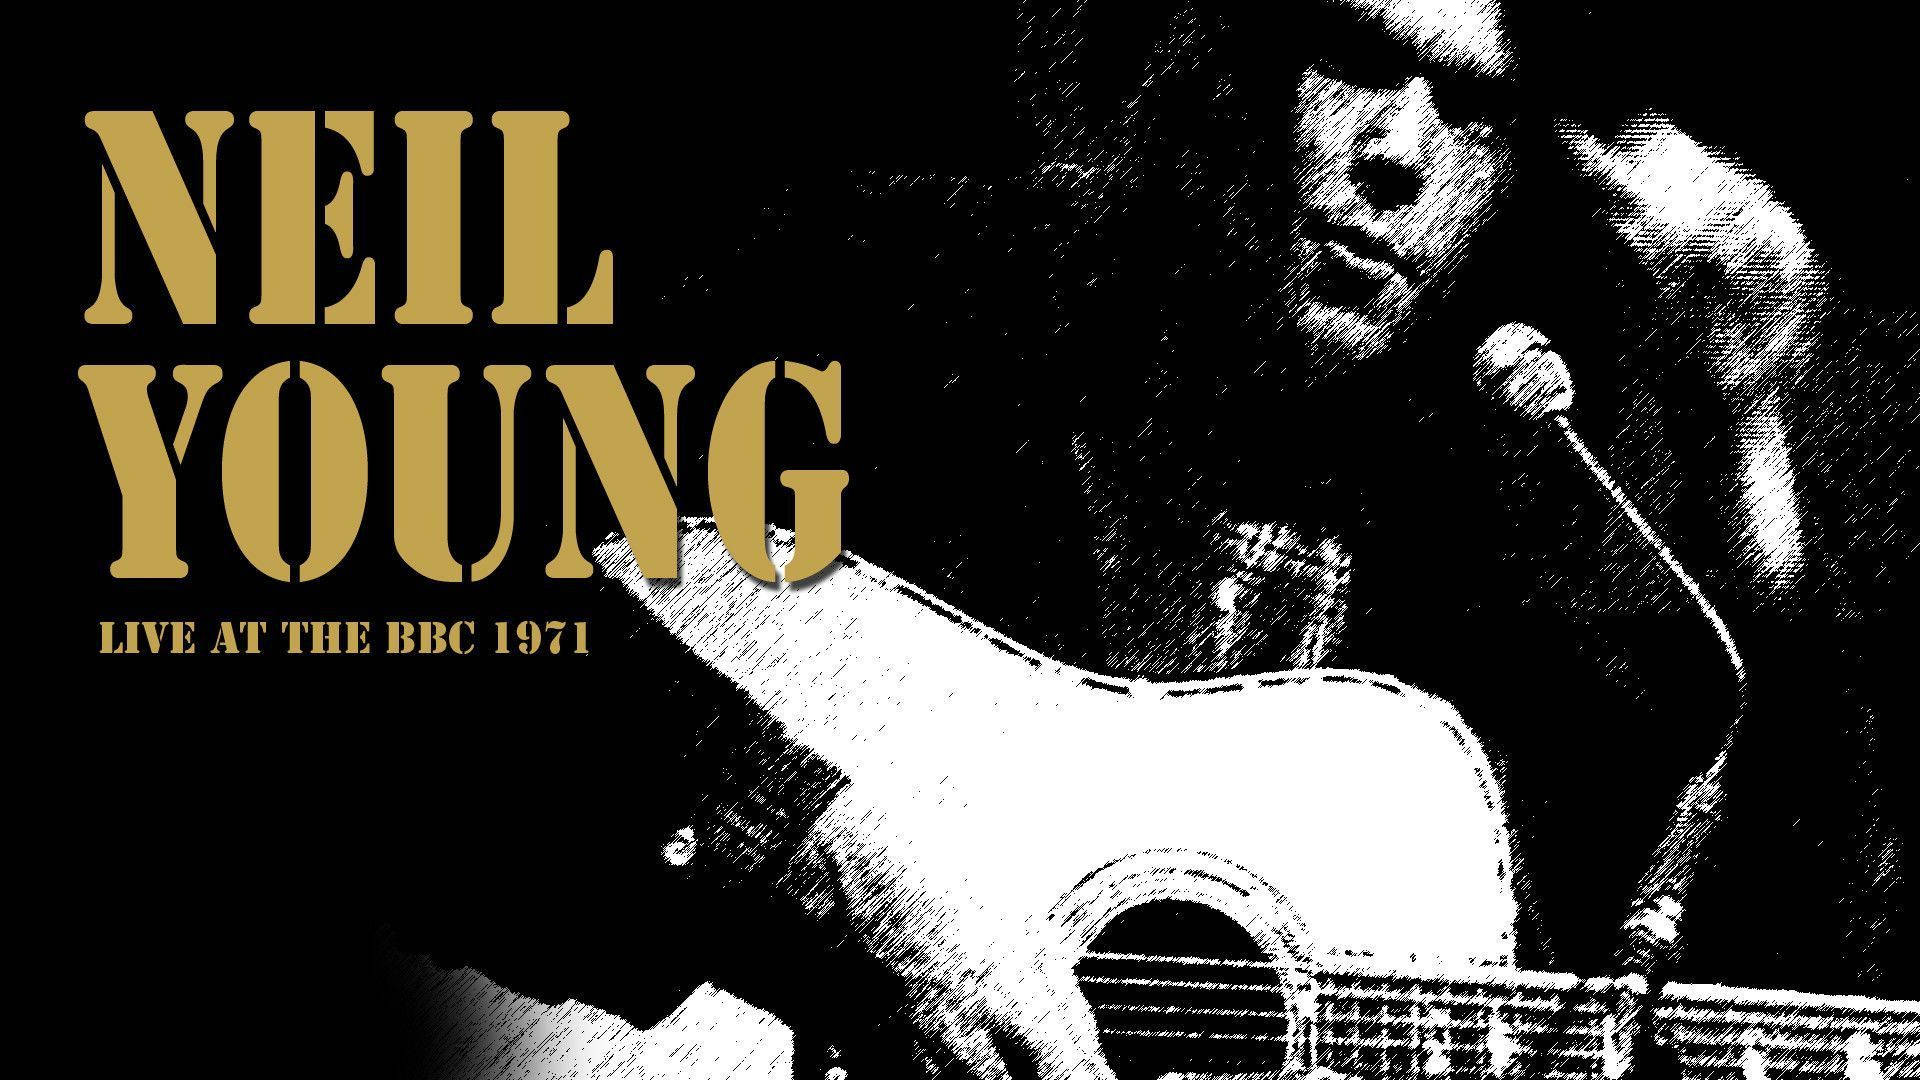 Neil Young Background Wallpaper